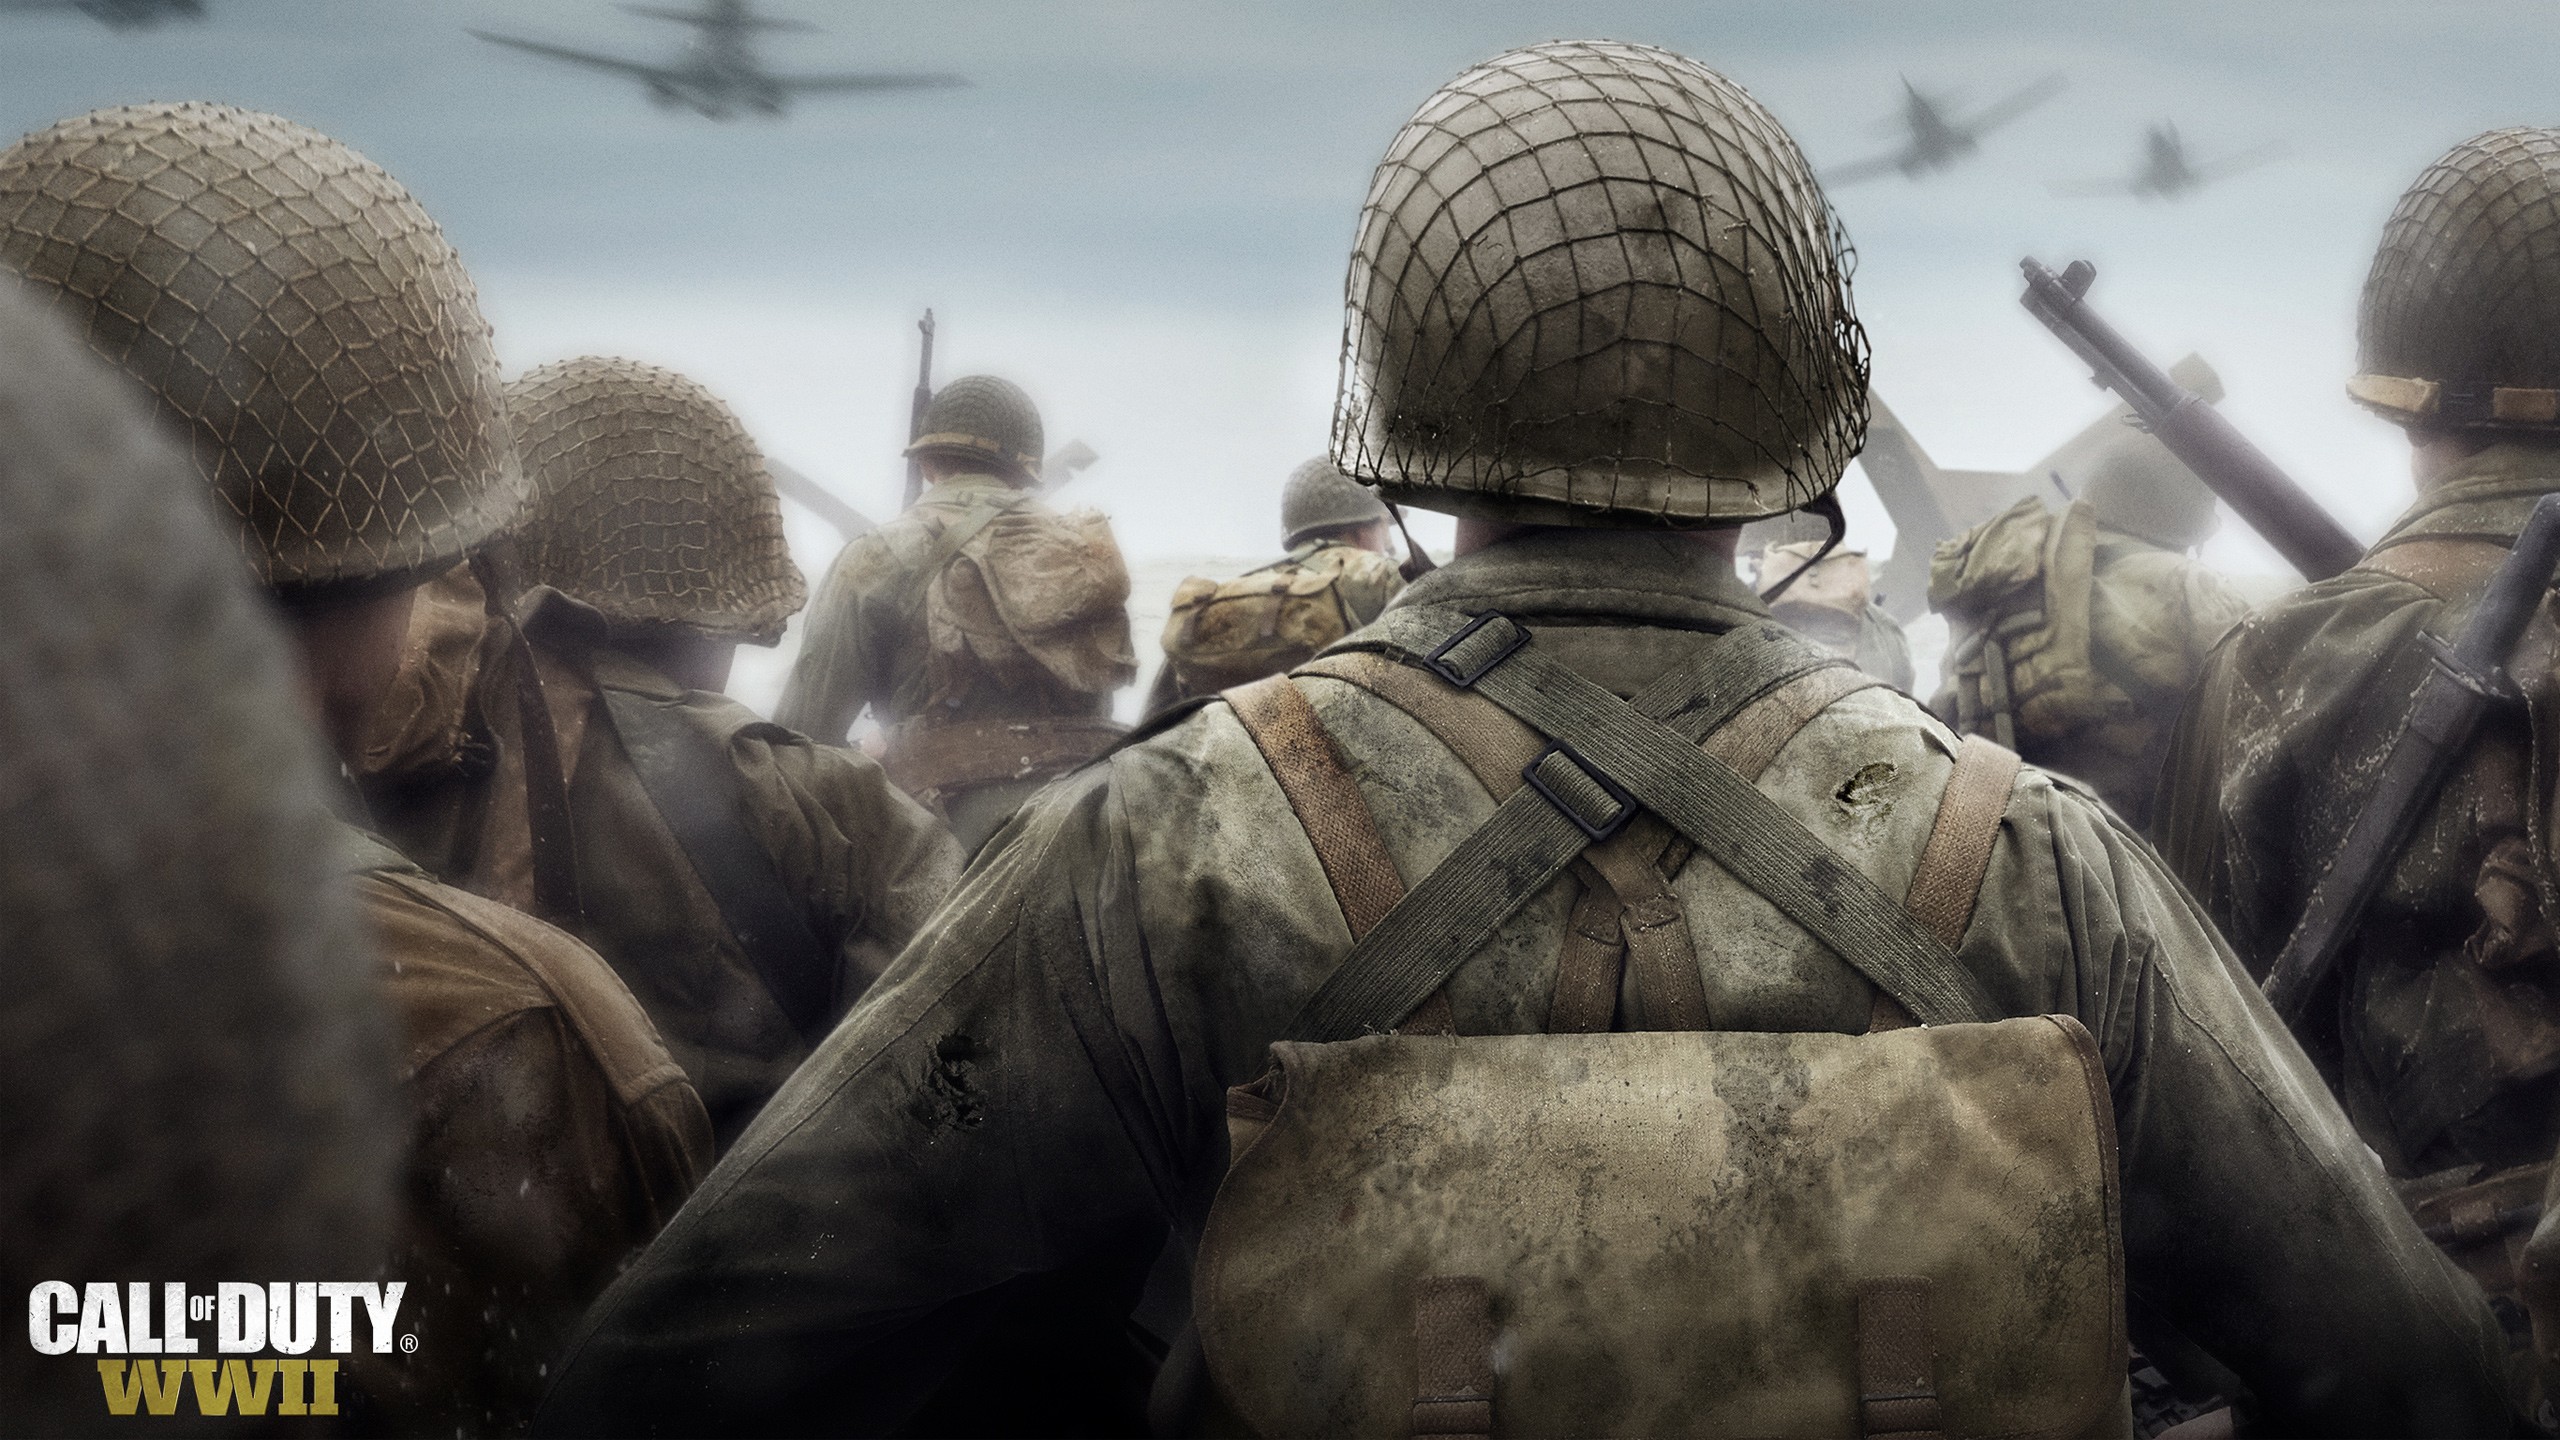 Call Of Duty WWii Gamers Call Of Duty WWii Call Of Duty 2560x1440